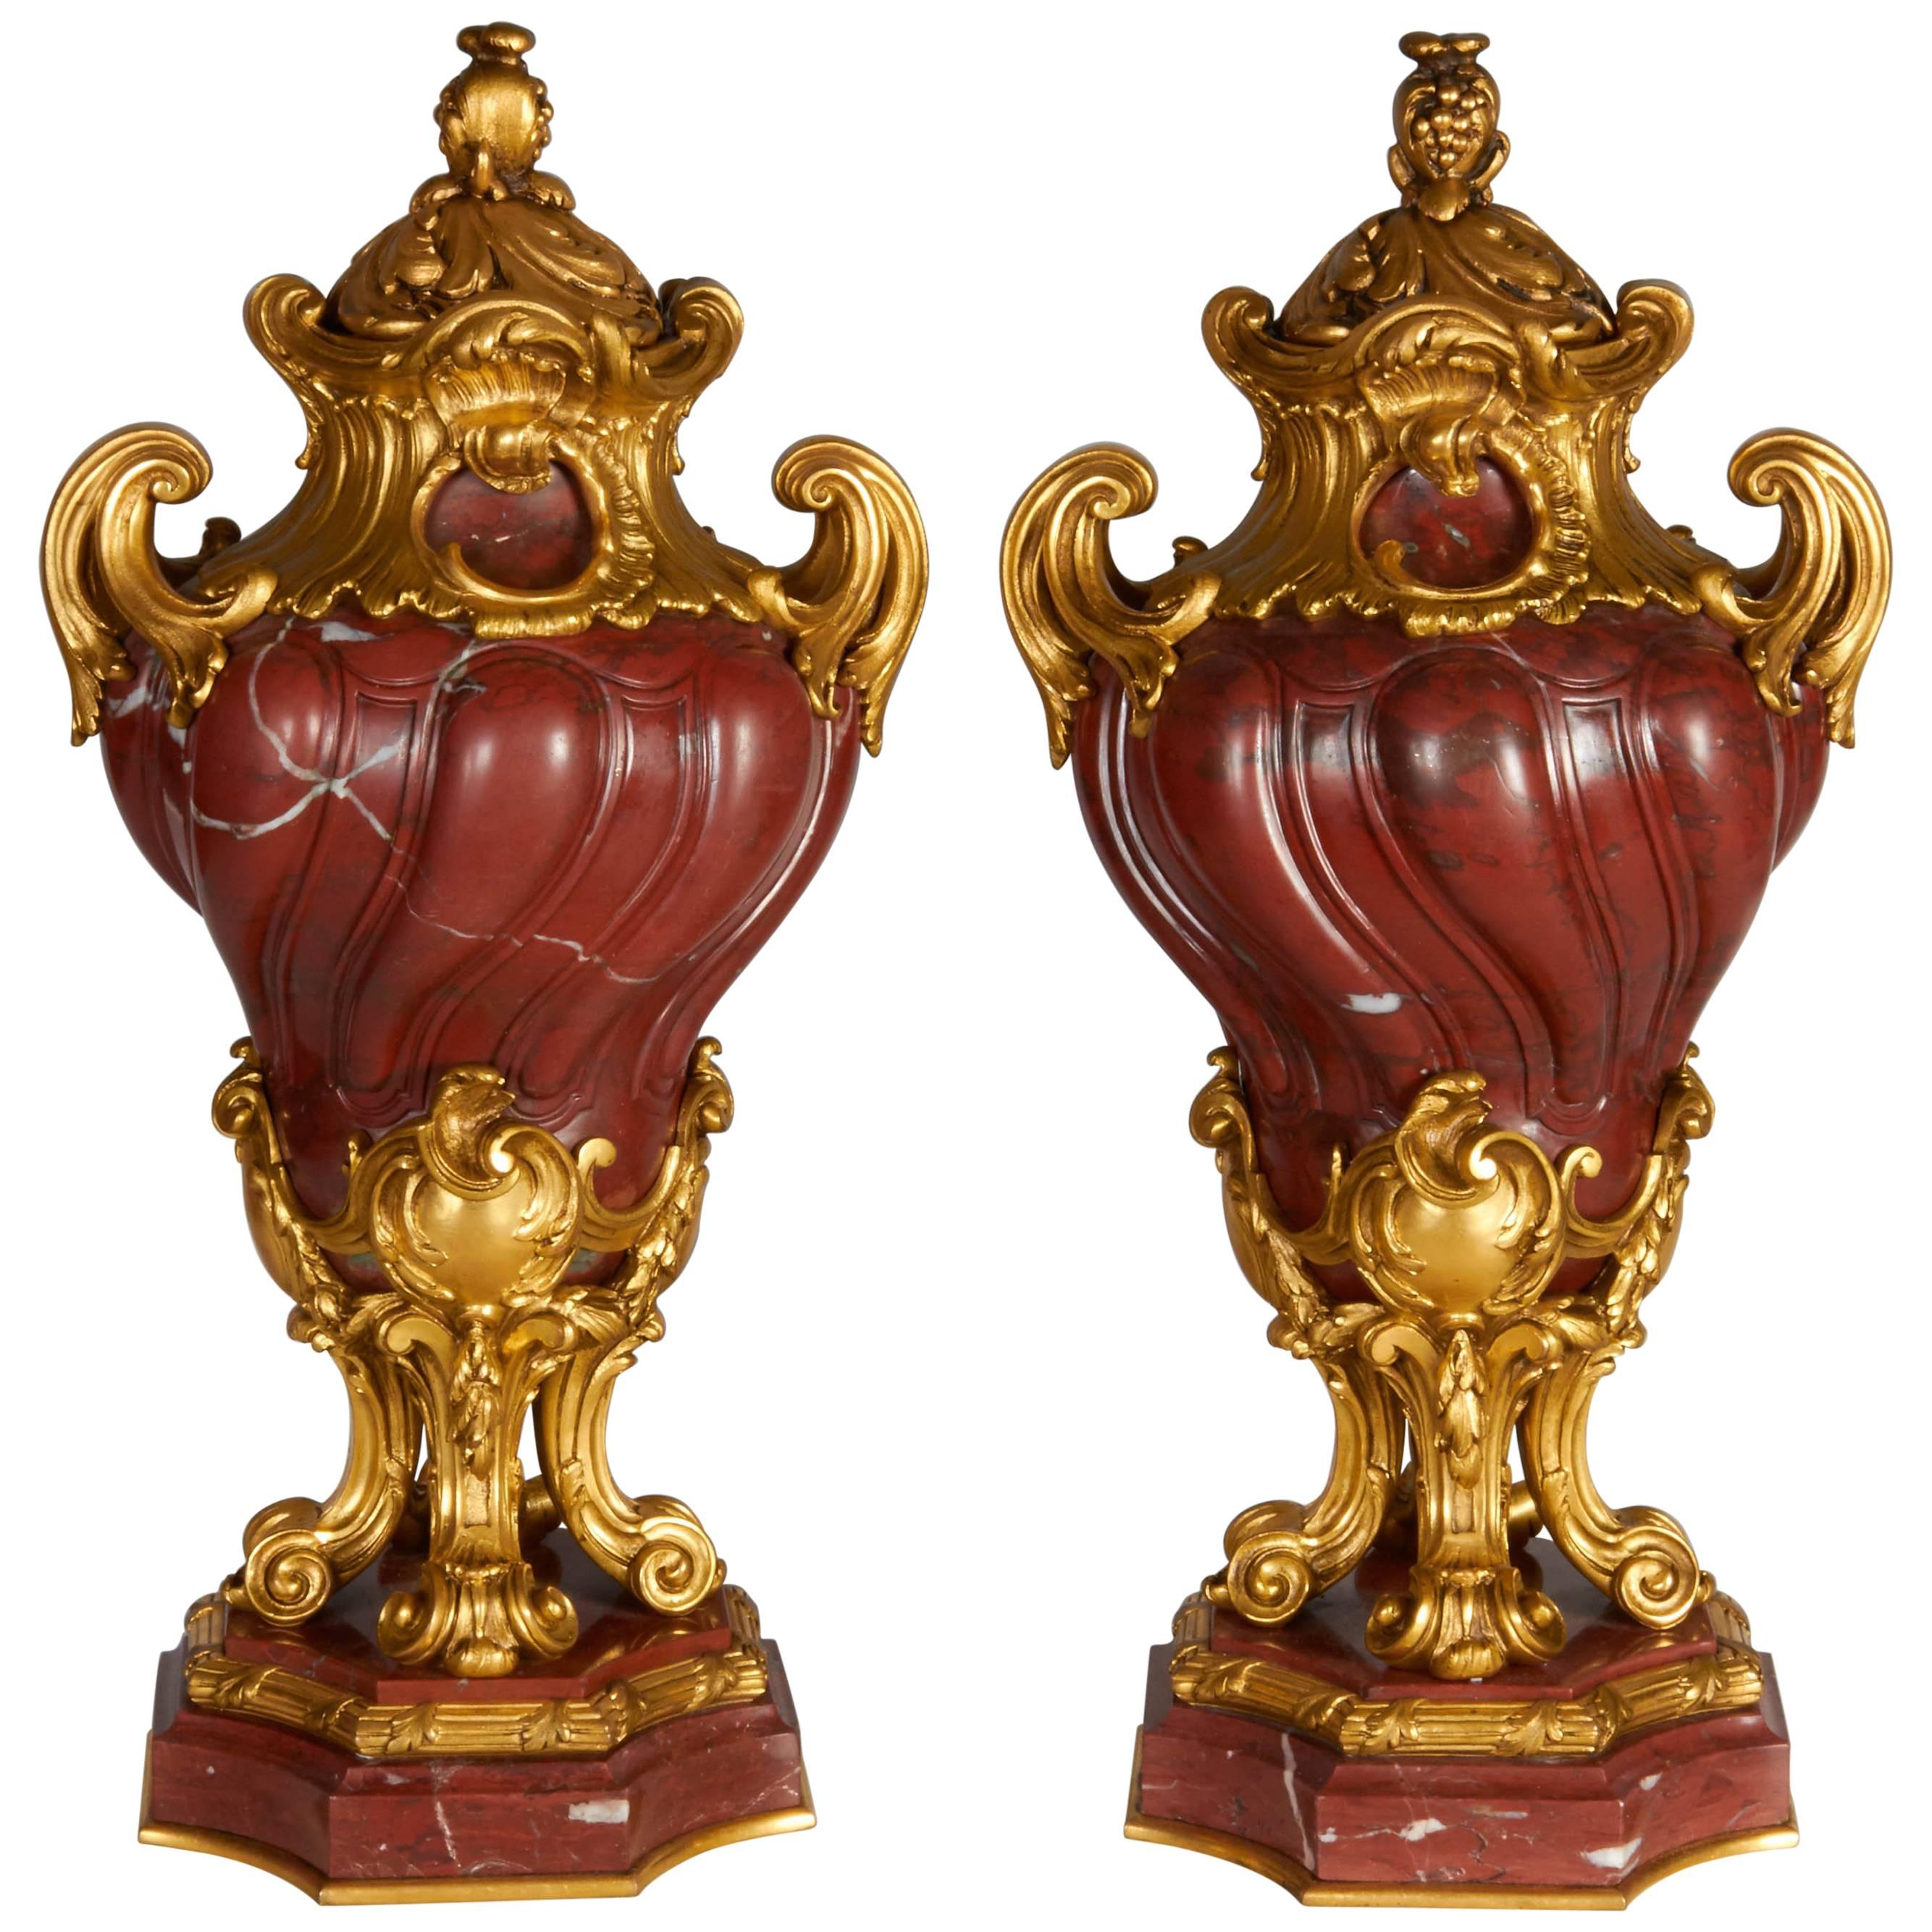 Pair of Antique French Transitional Ormolu-Mounted Rouge Griotte Marble Vases